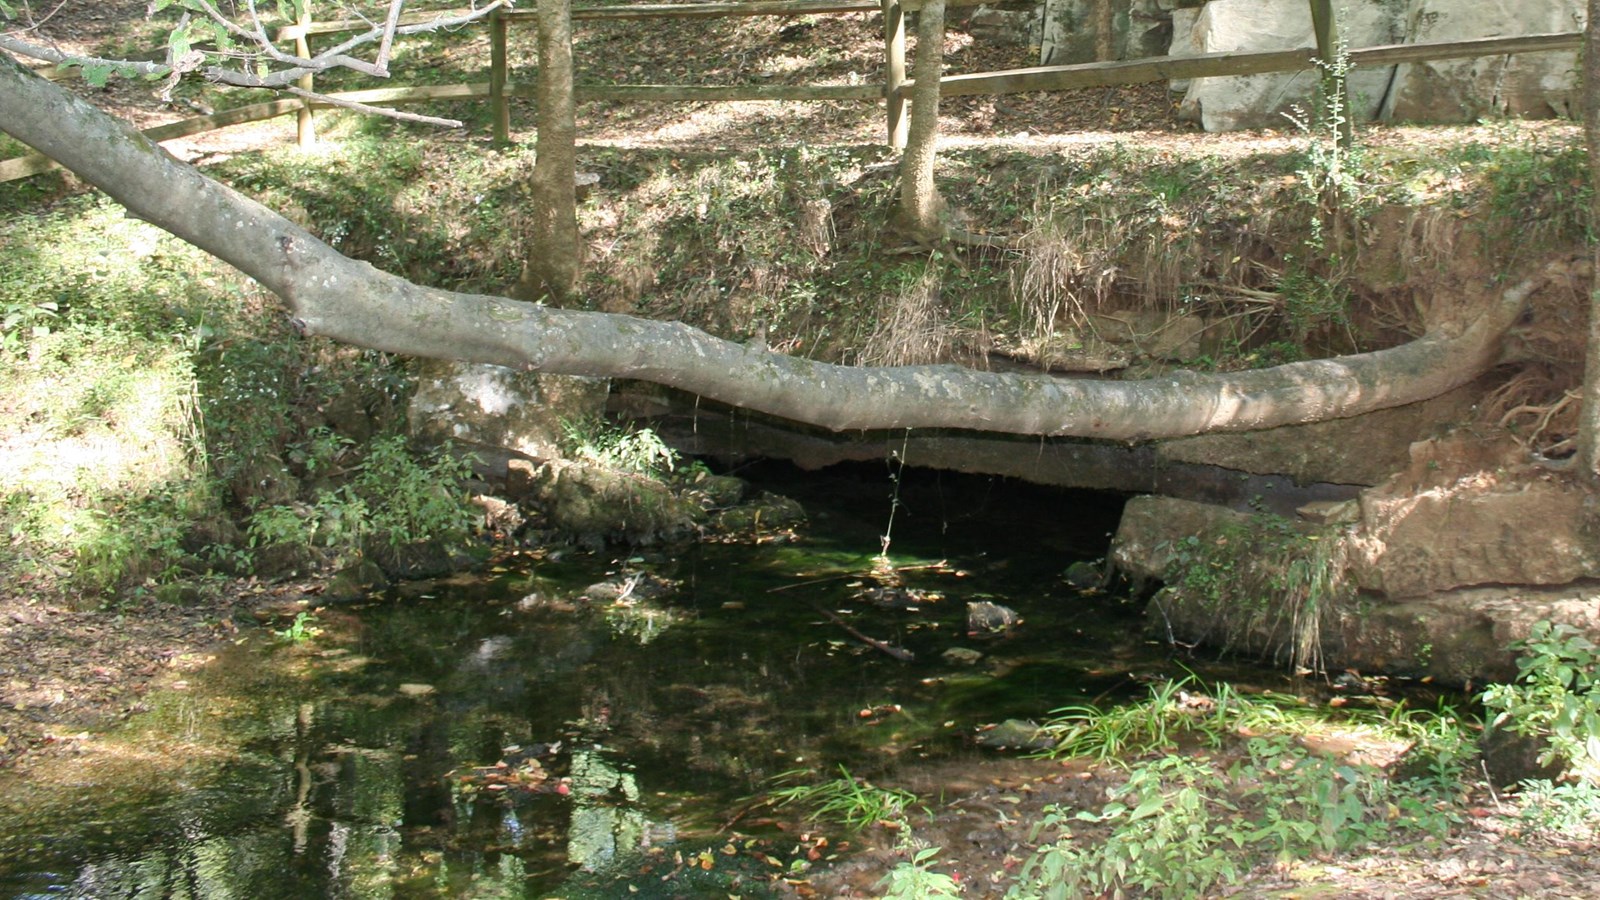 Water comes out of the ground with exposed rocks behind spring site. Trees shade entire area